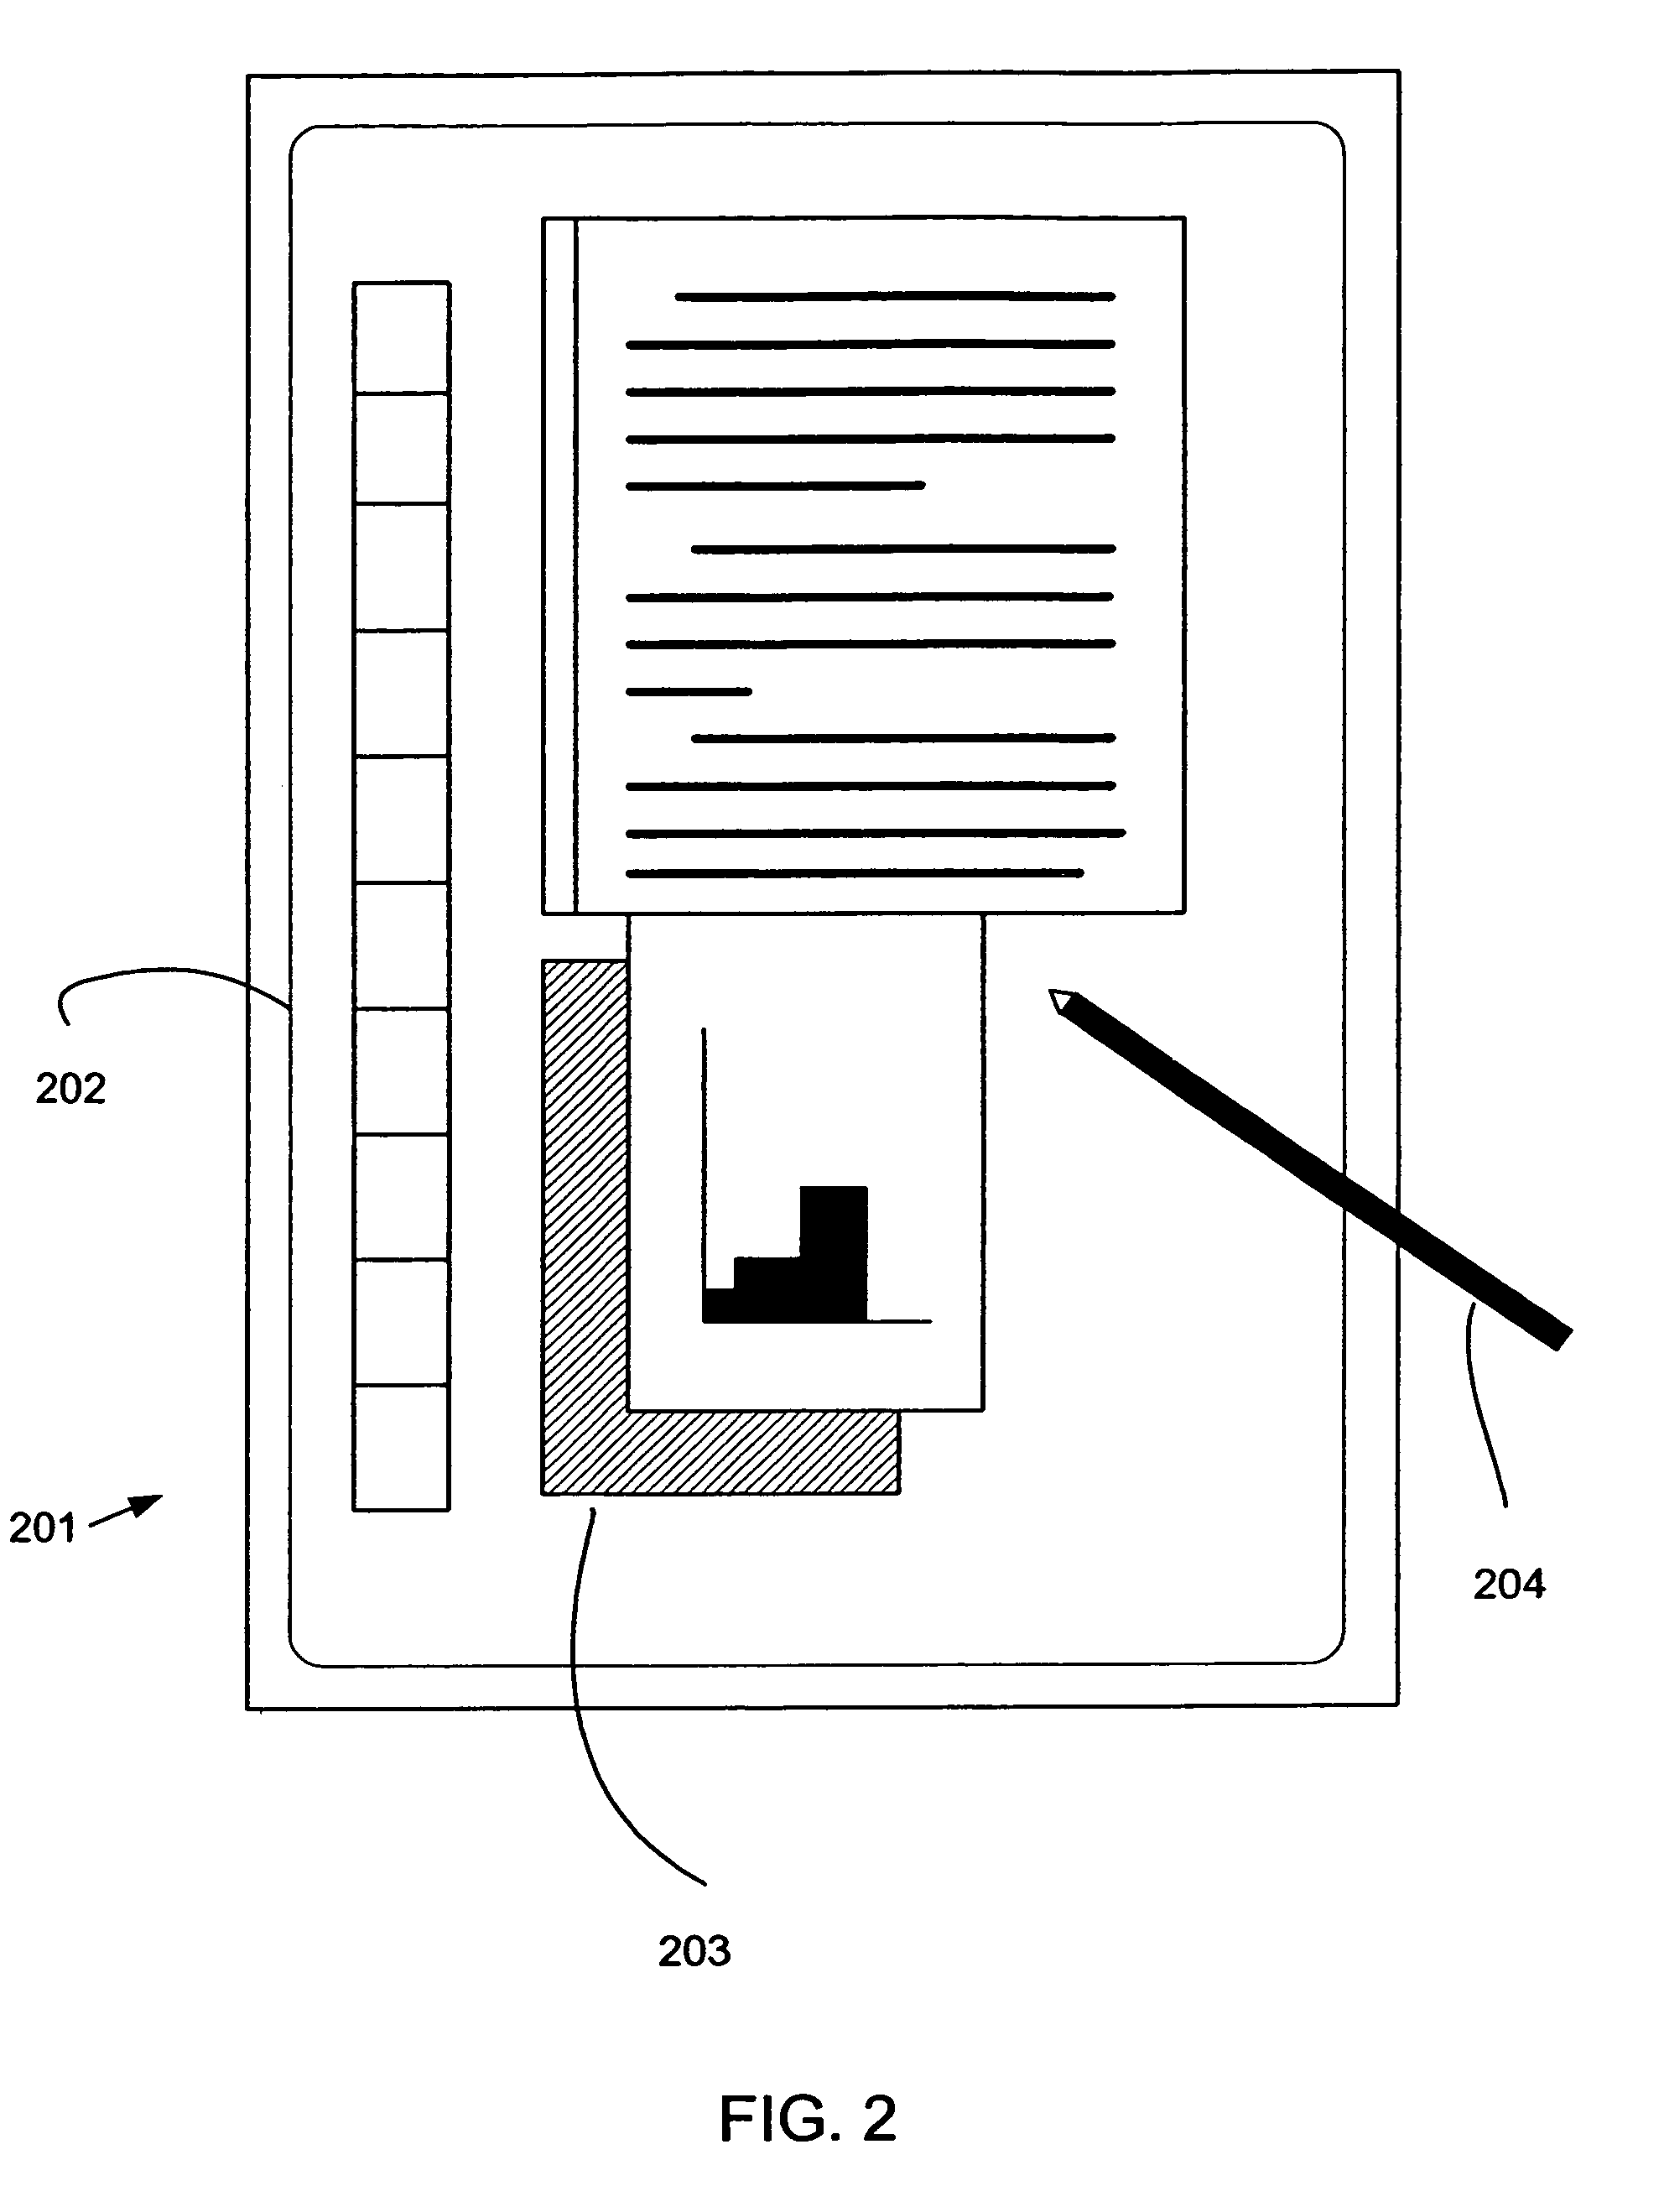 Two-button mouse input using a stylus